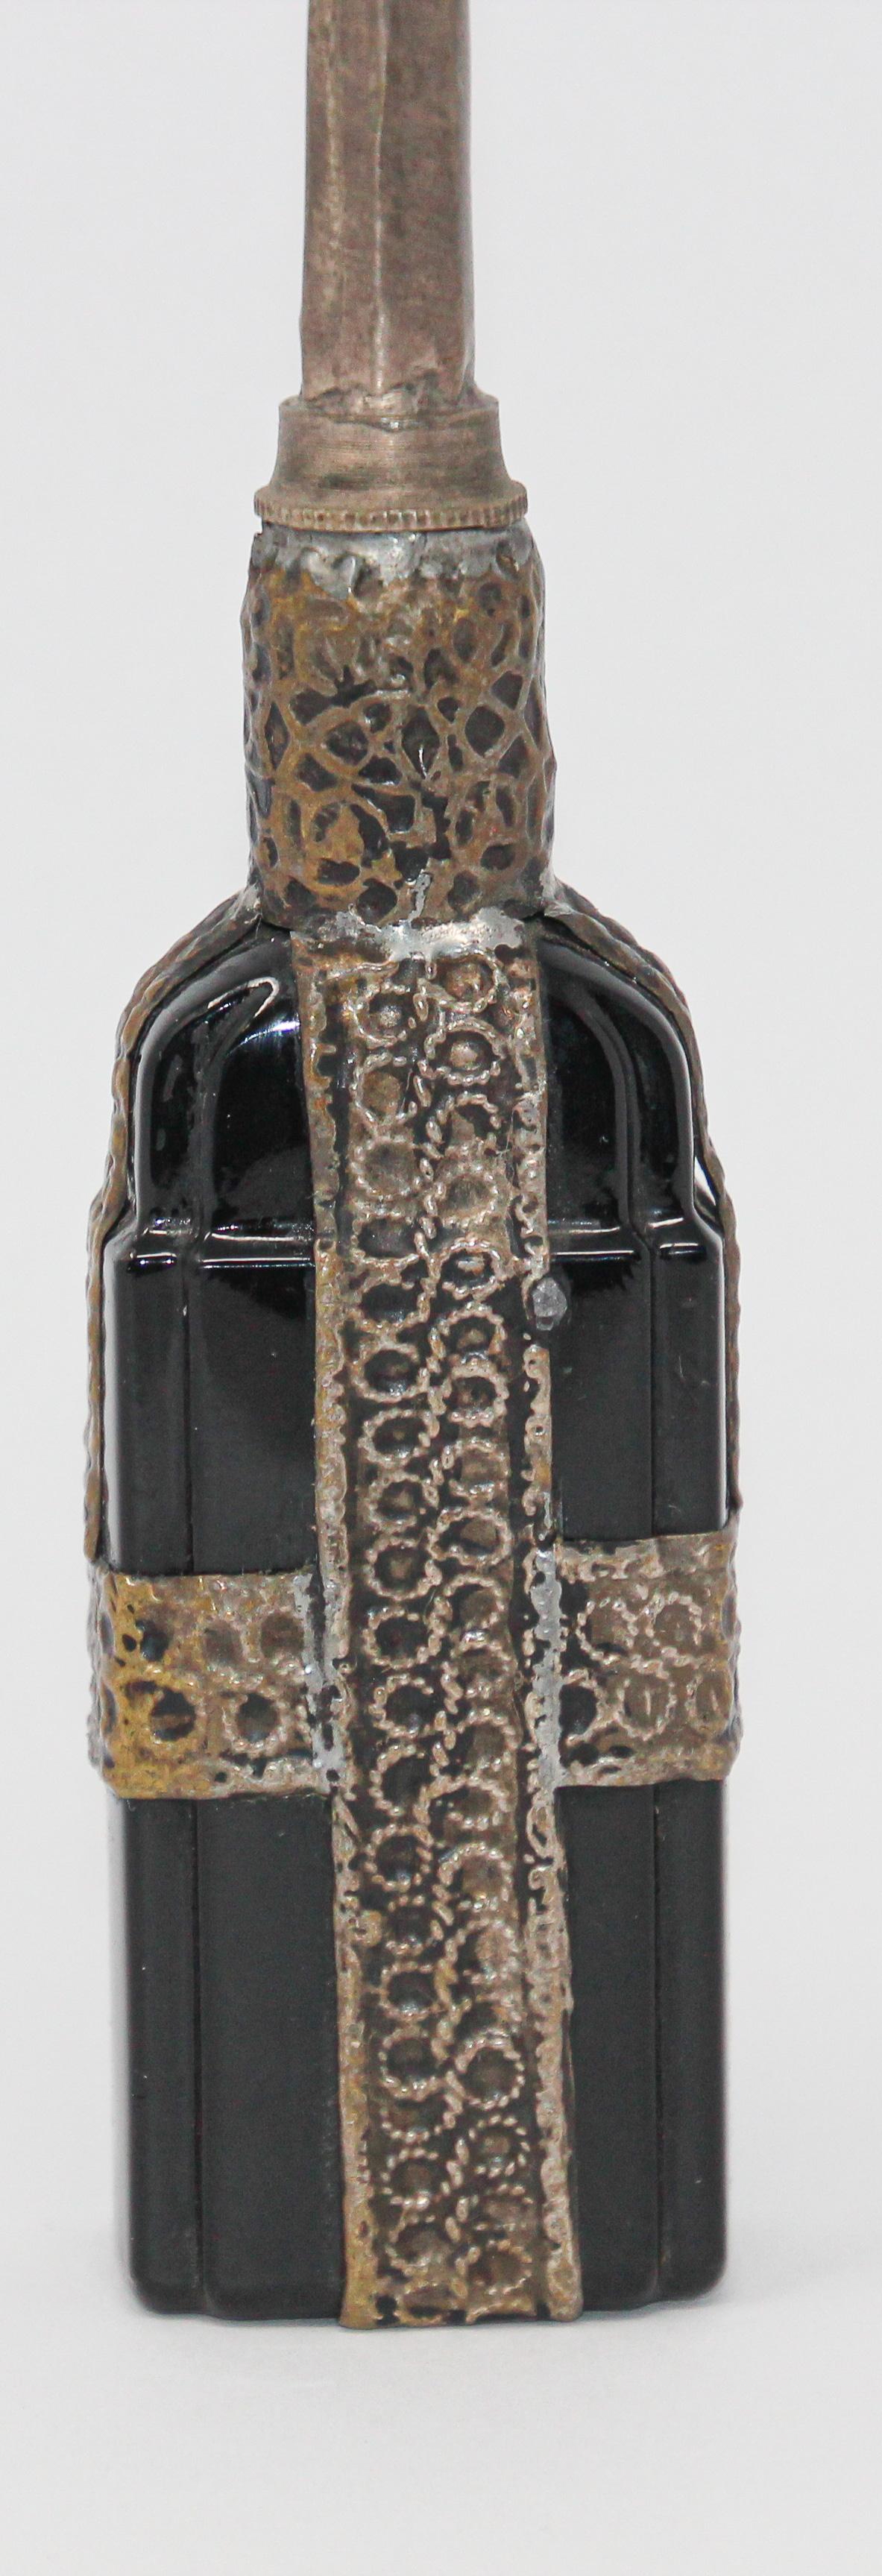 Handcrafted Moroccan Moorish glass perfume bottle or rose water sprinkler with raised embossed silvered metal floral design over black glass.
The pressed glass bottle in Art Deco, Art Nouveau style is oval shape with curved sides and hand decorated